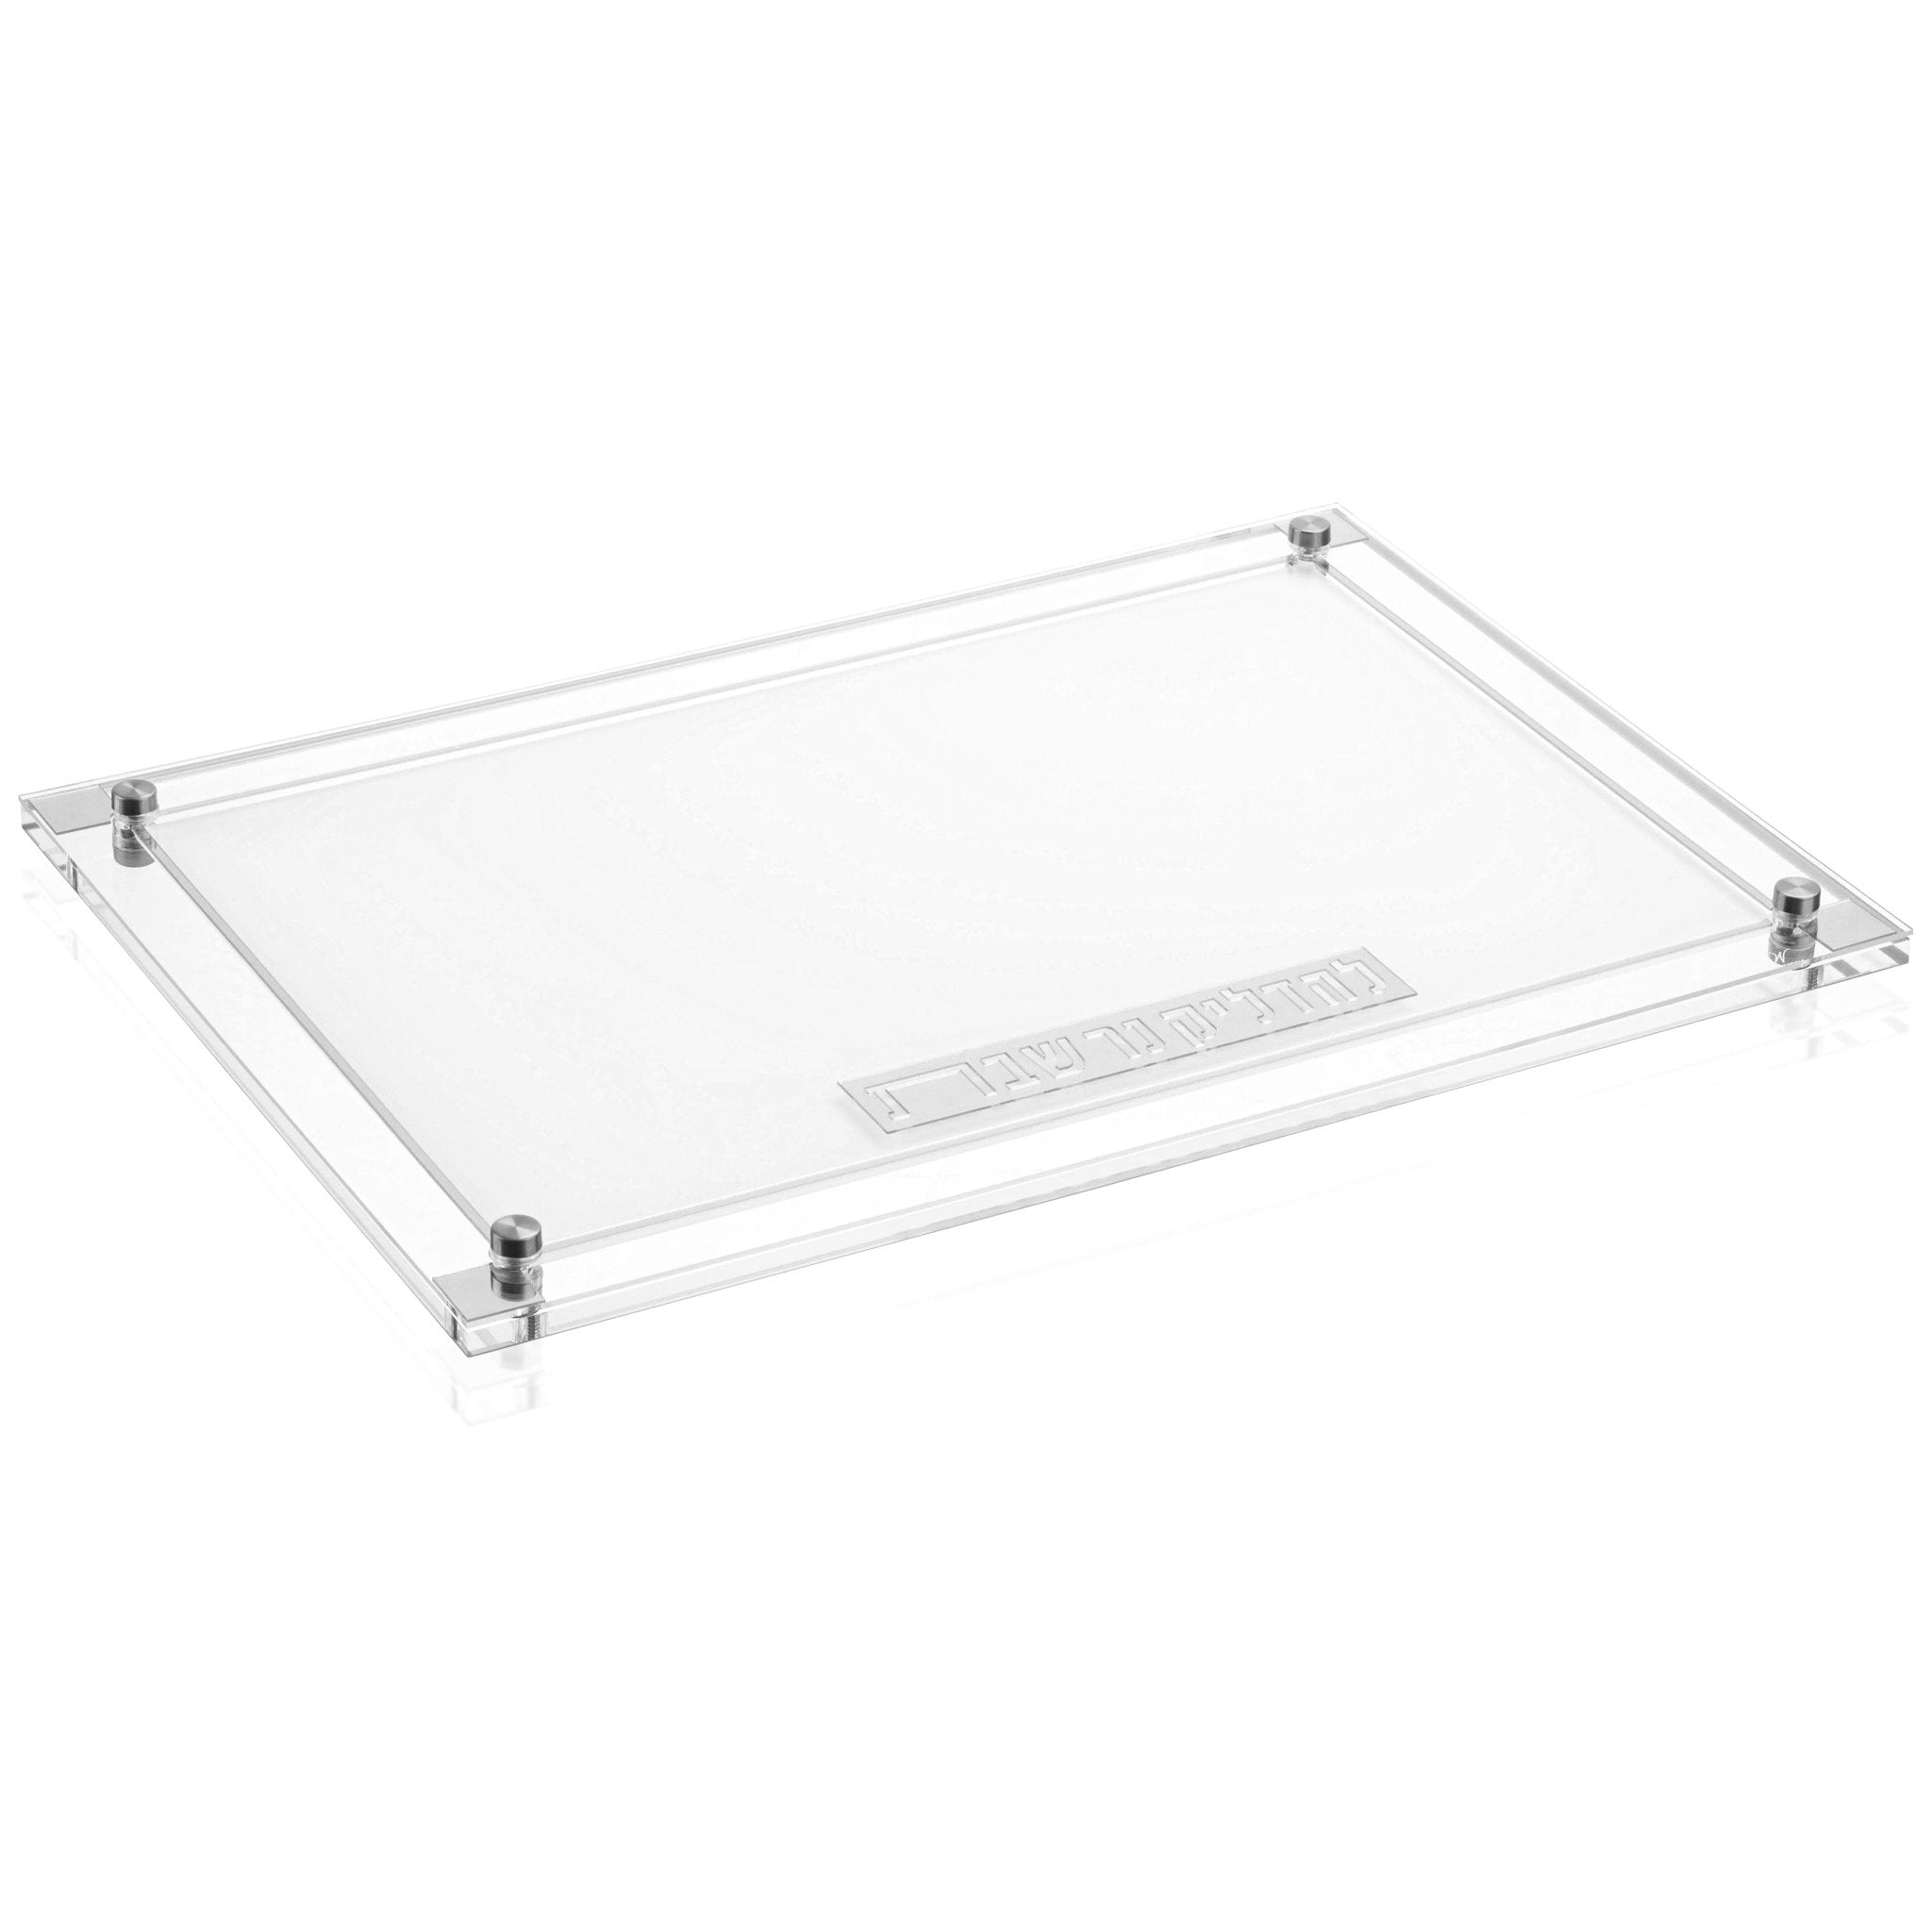 Classic 2.0 Hadlokas Neiros Tray - Waterdale Collection